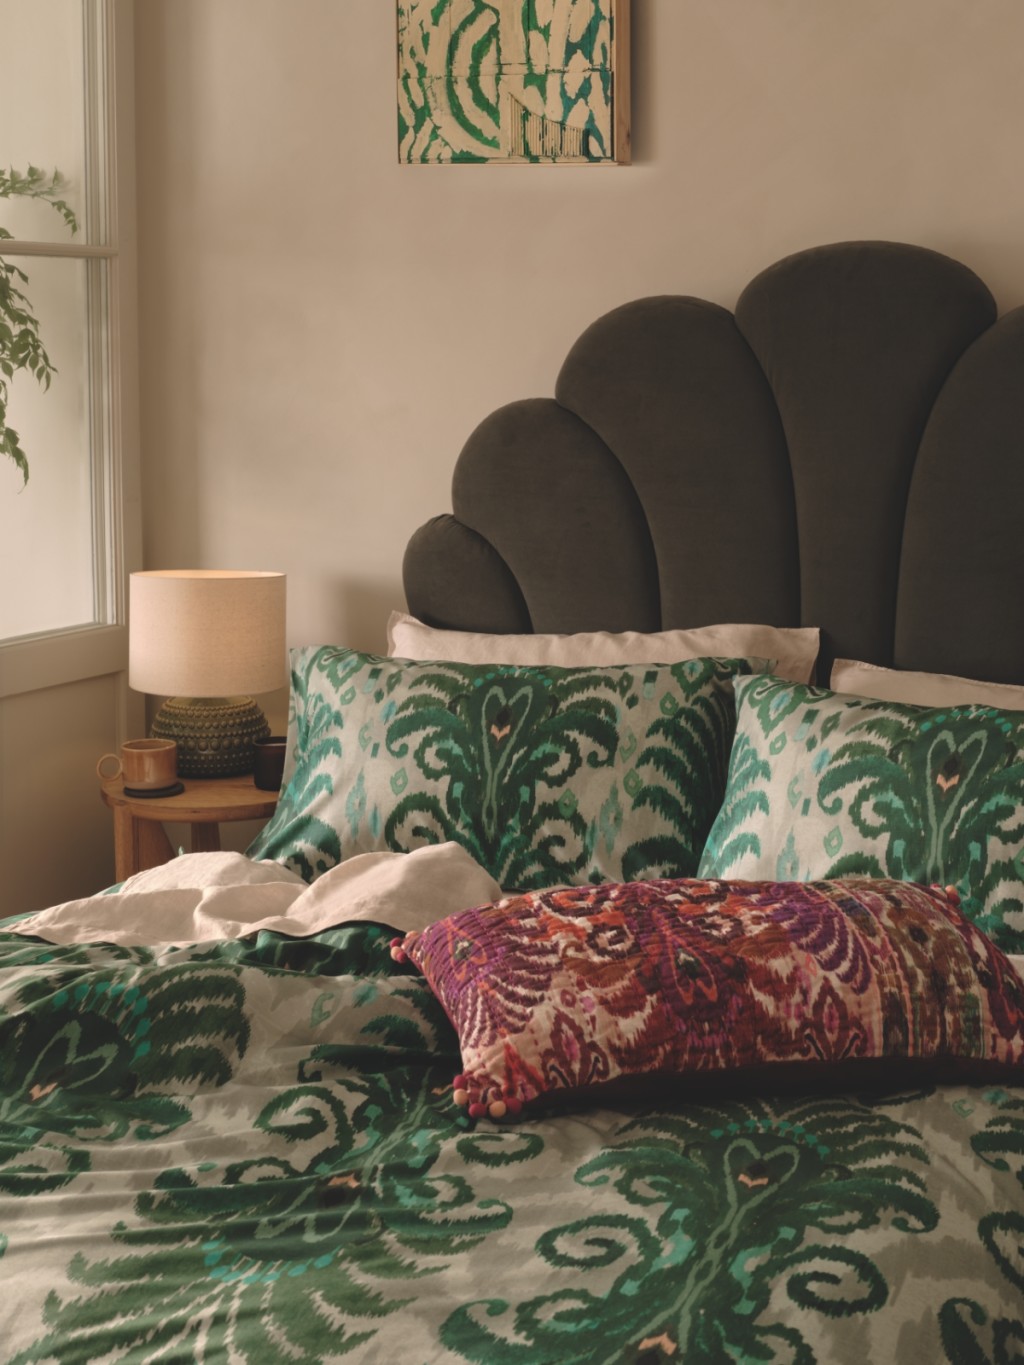 Bed made with a vibrant, boldly patterned green and white duvet set. Shop the Casual Cabana trend